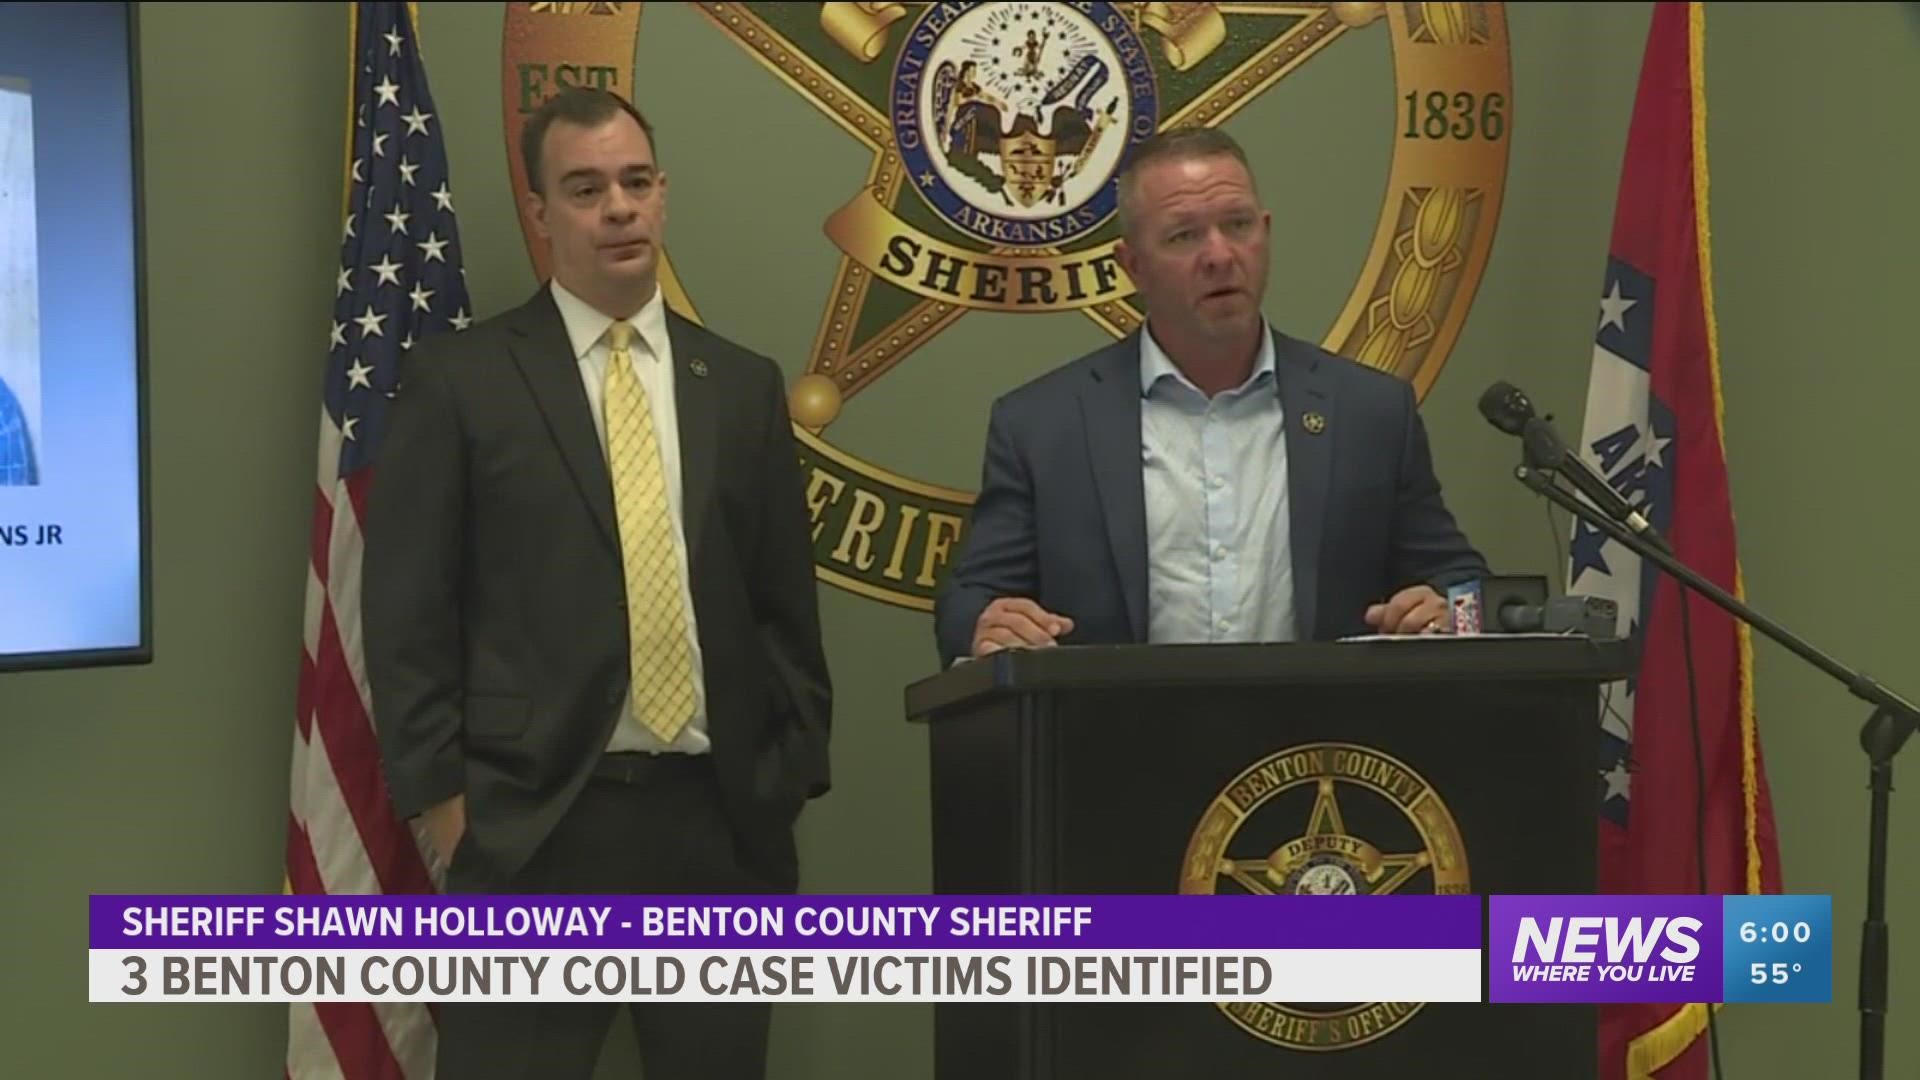 The Benton County Sheriff’s Office gave an update on three cold case homicides after “major advancements” were discovered through DNA evidence.